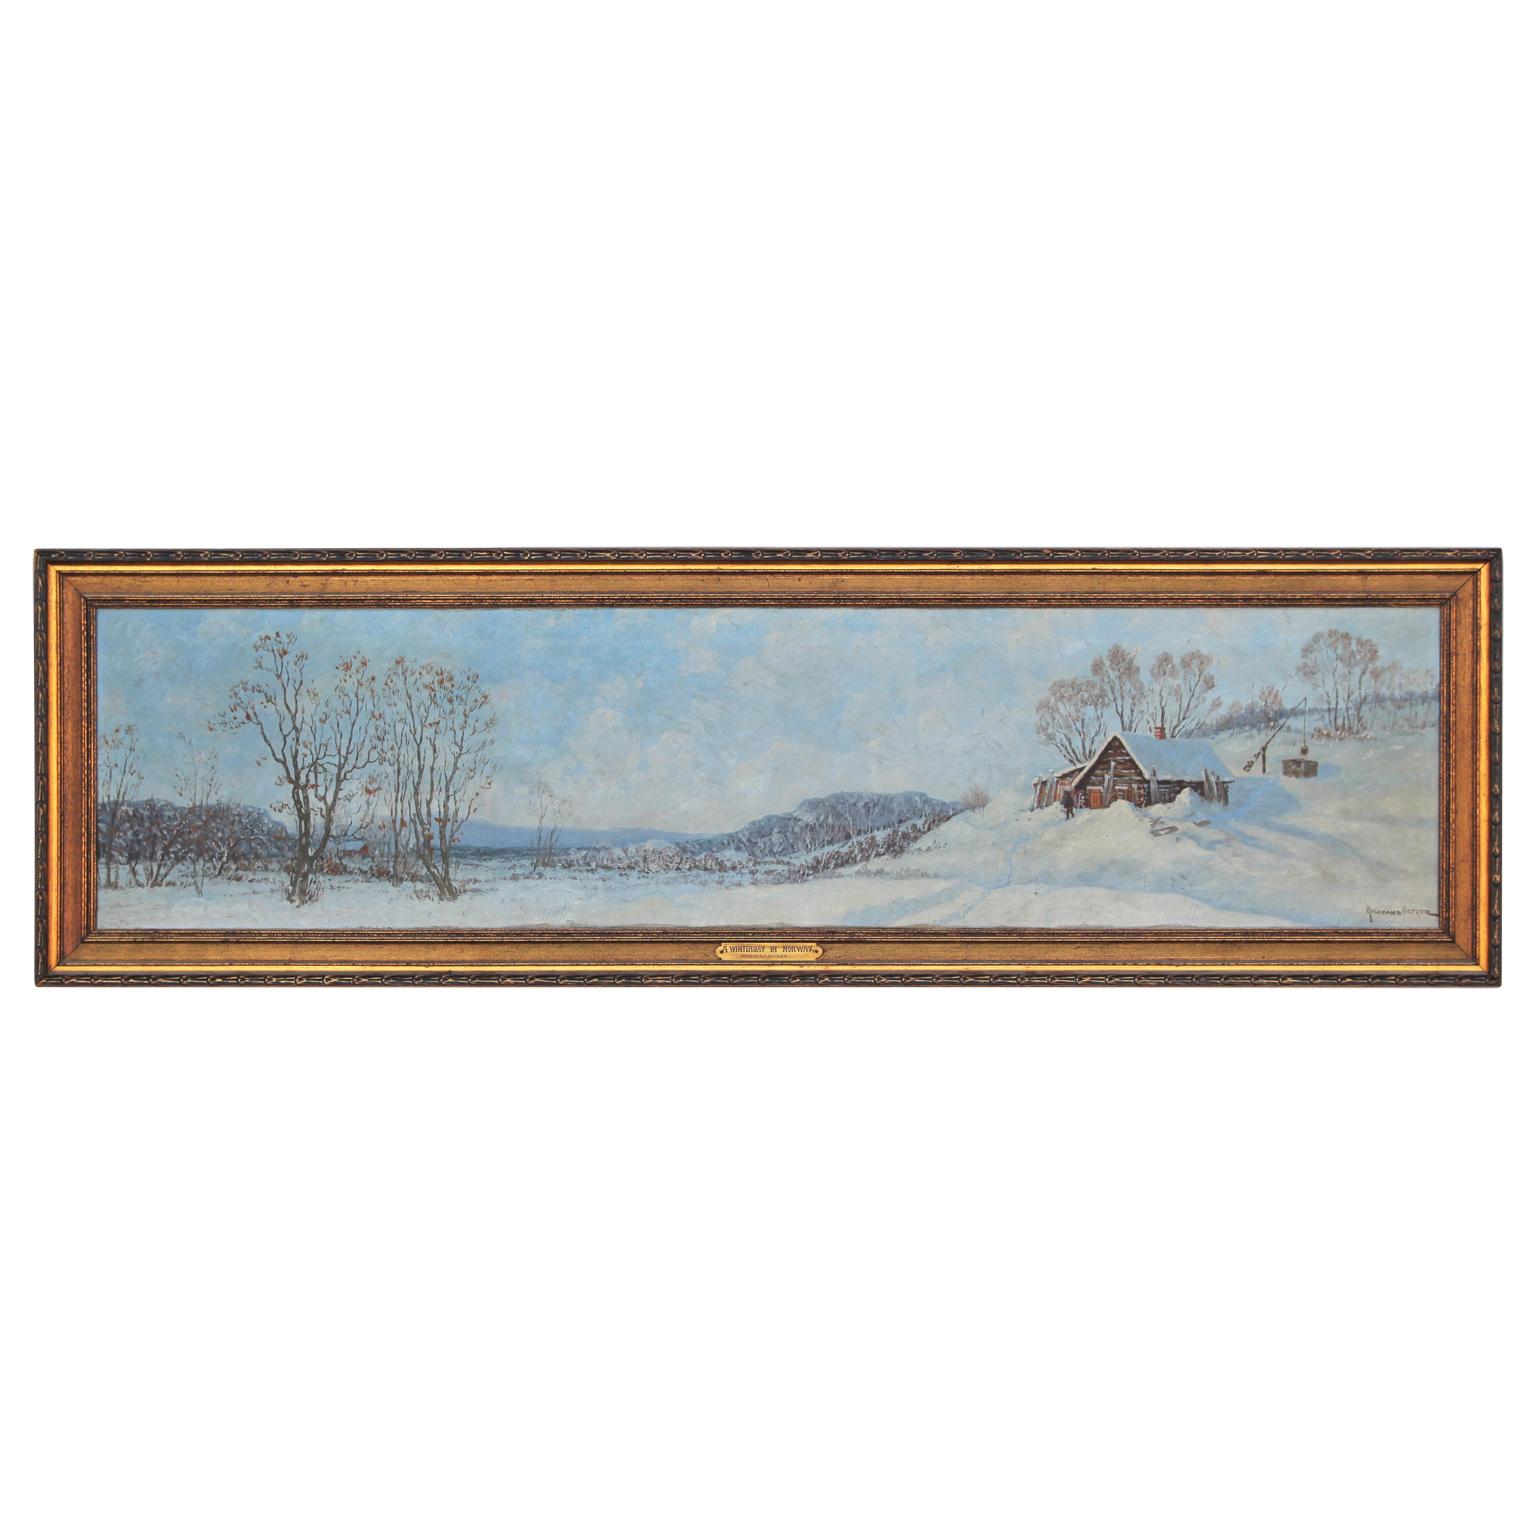 Gulbrand Sether Landscape Painting - "A Winter Day in Norway" Long Horizontal Snowy Pastoral Landscape Oil Painting